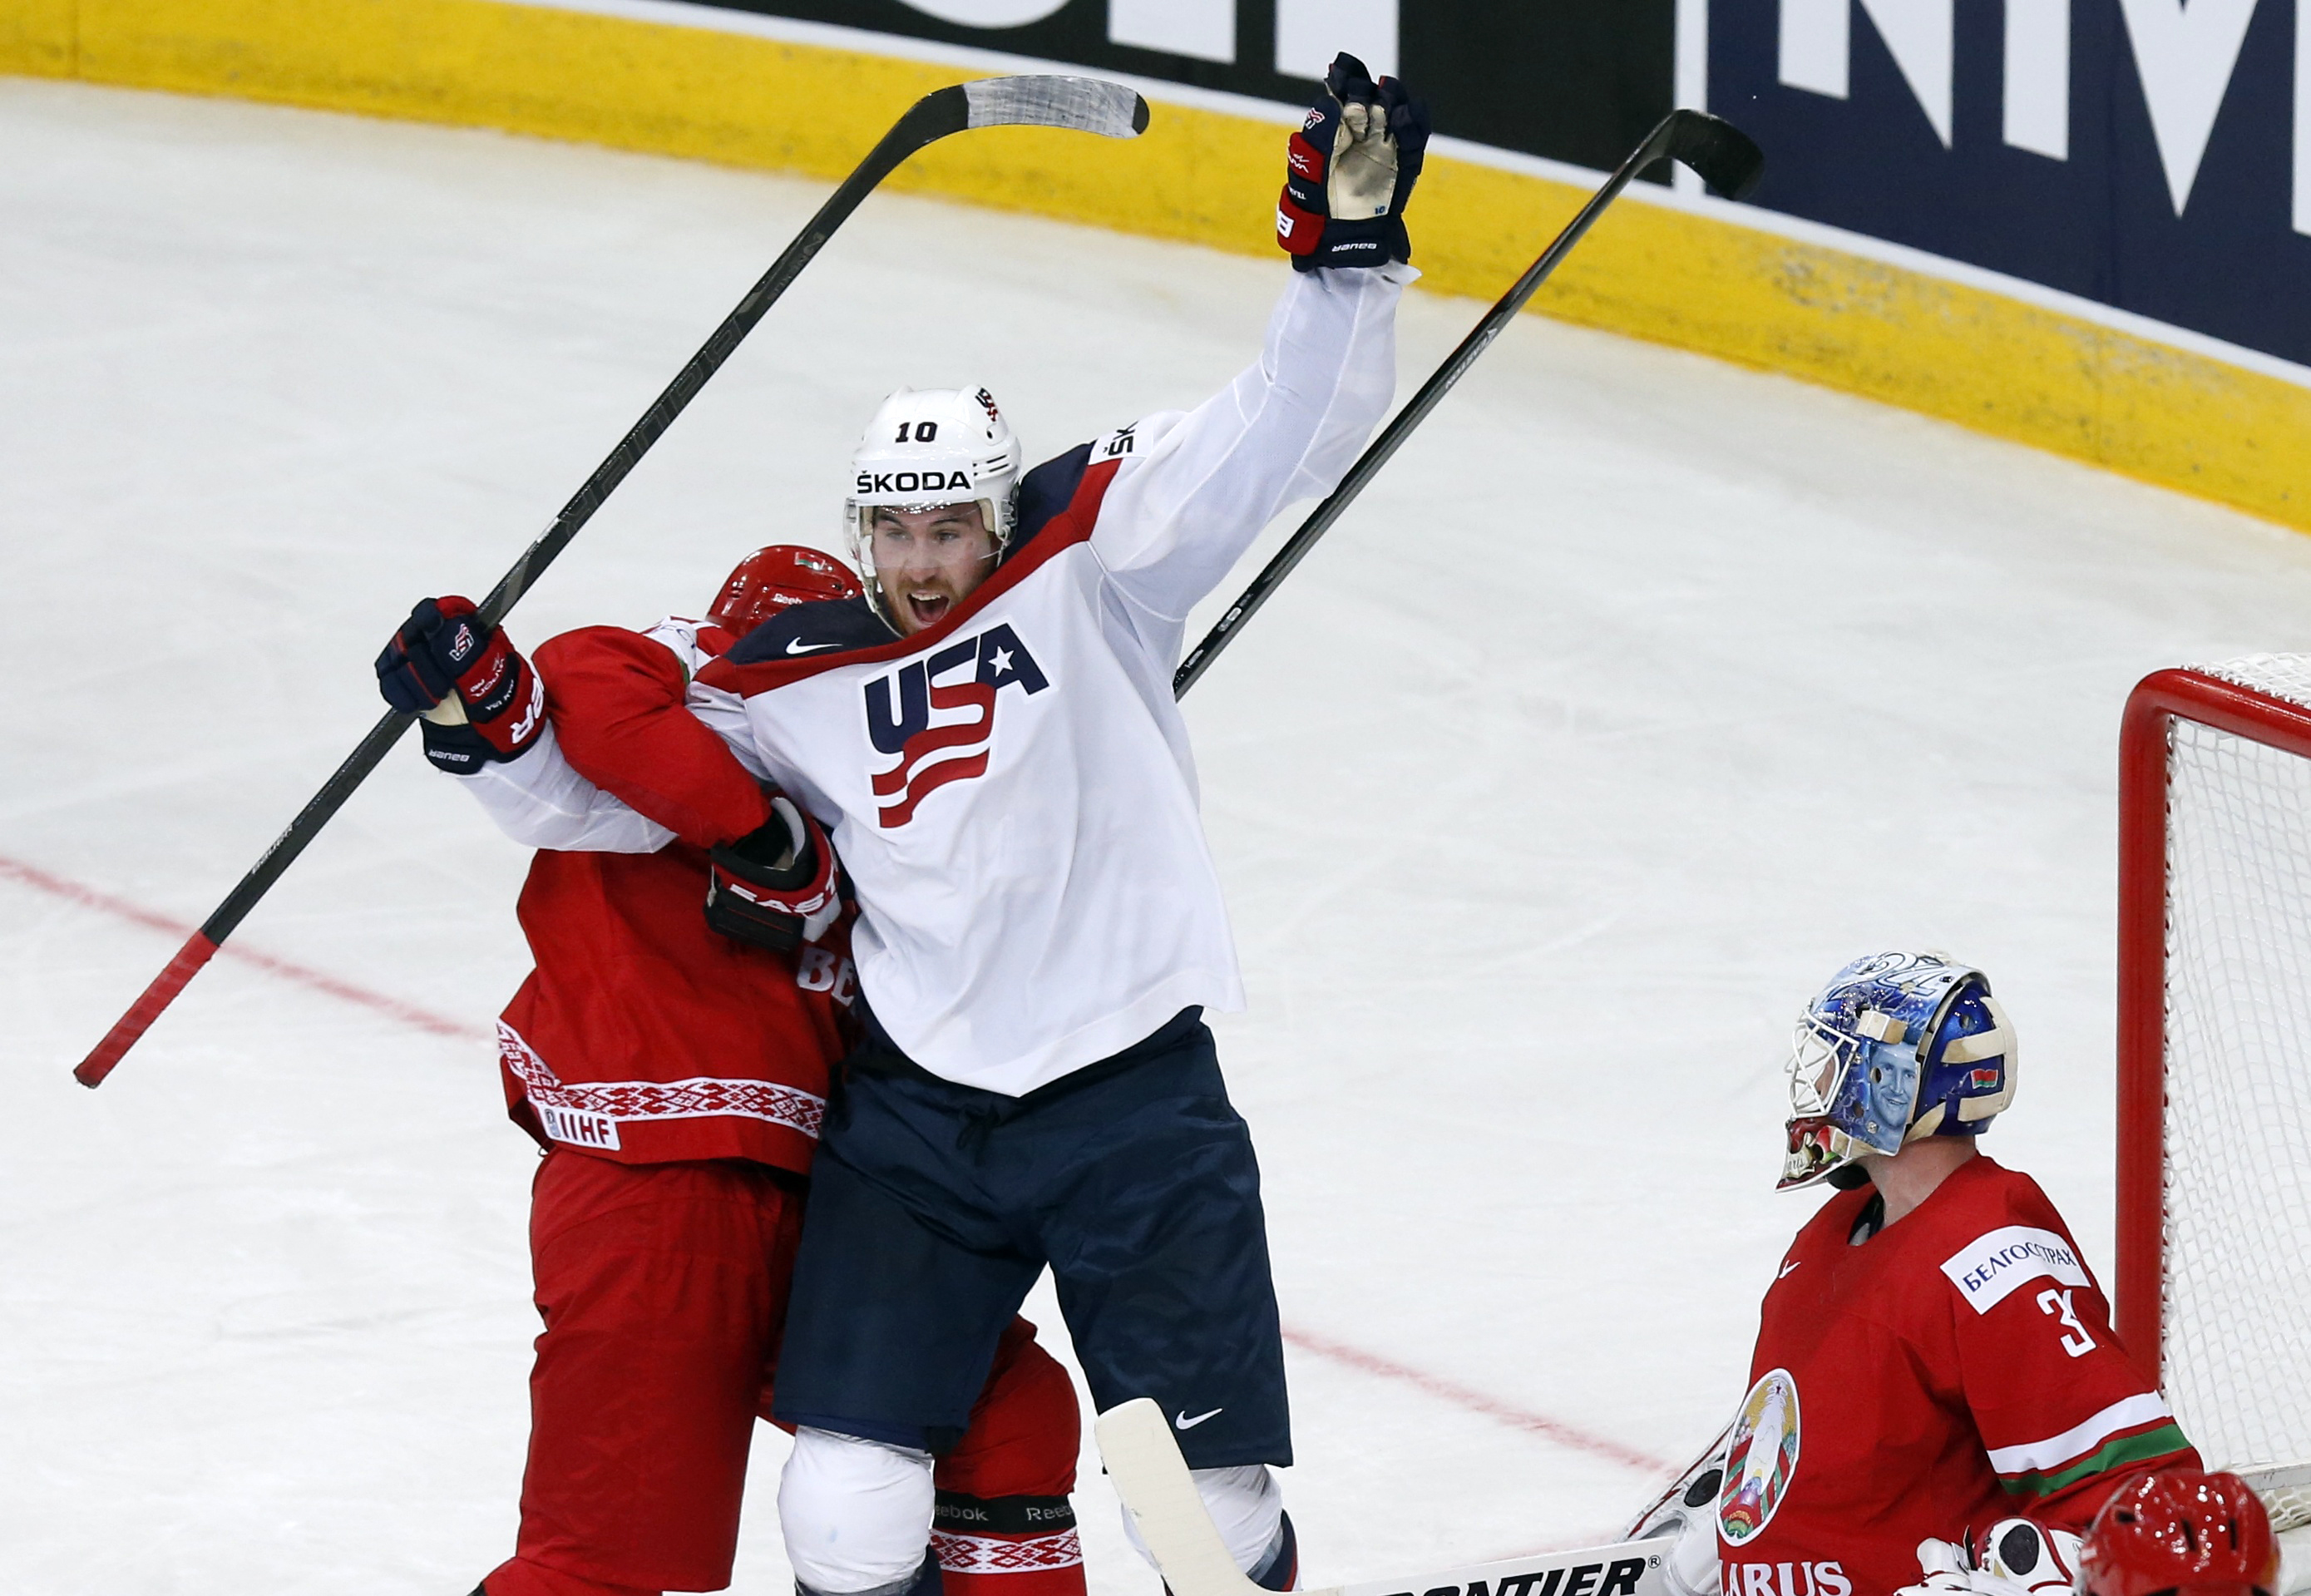 Hayes of the U.S. celebrates the goal of team mate Trouba against goalkeeper Mezin of Belarus during the second period of their men's ice hockey World Championship Group B game at Minsk Arena in Minsk